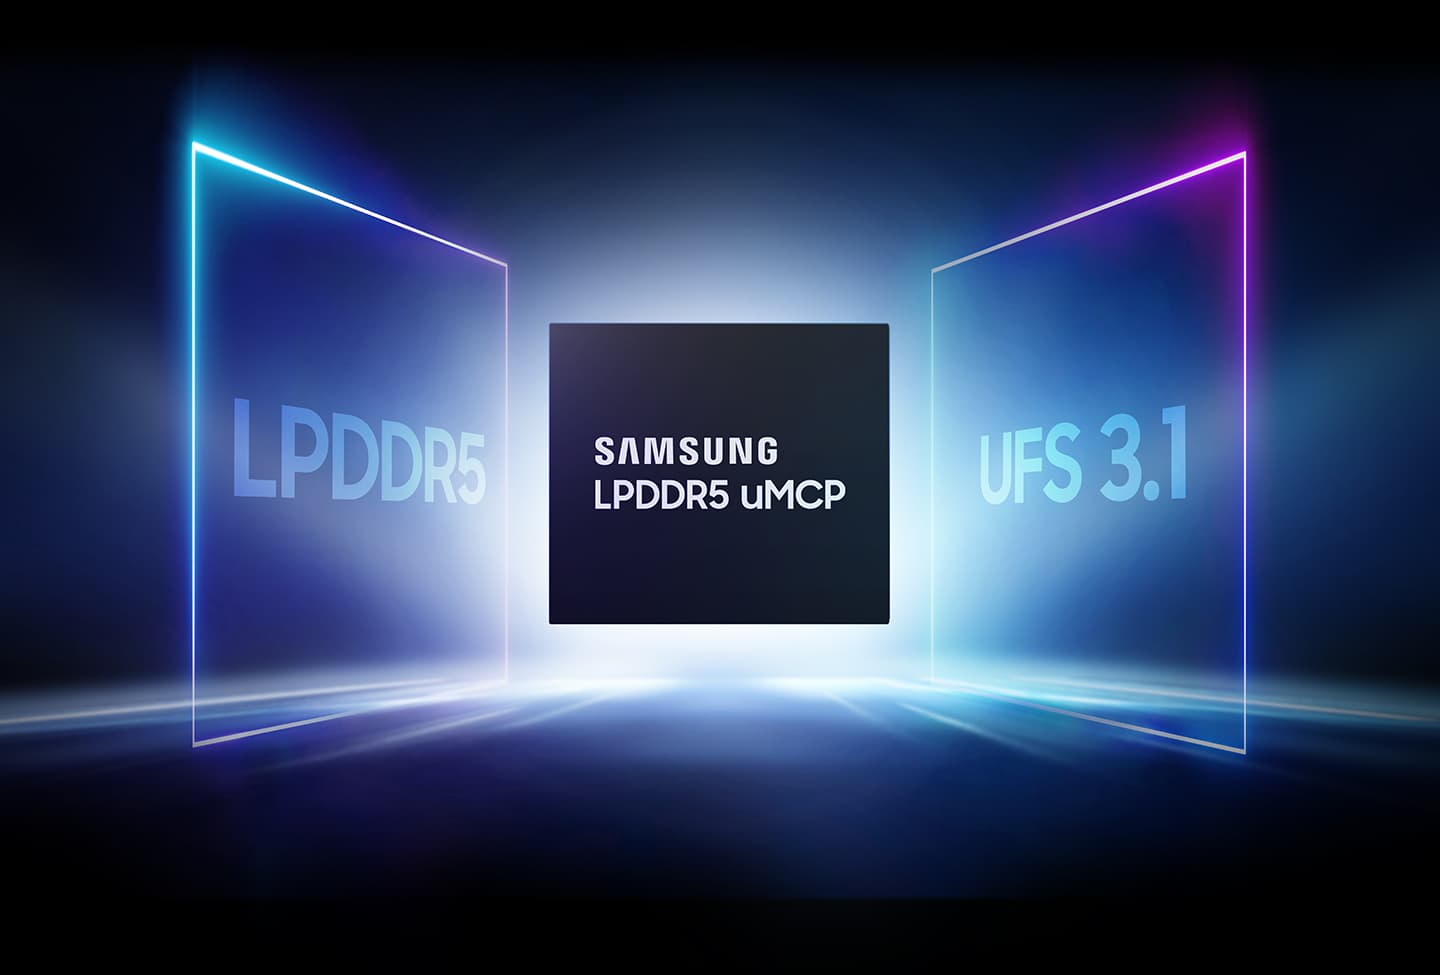 An image is SAMSUNG LPDDR5 uMCP product is in the center, and UFS 3.1 and LPDDR5 products are placed on both sides. And it is a visual graphic showing the performance of UFS 3.1 and LPDDR5 is combined.